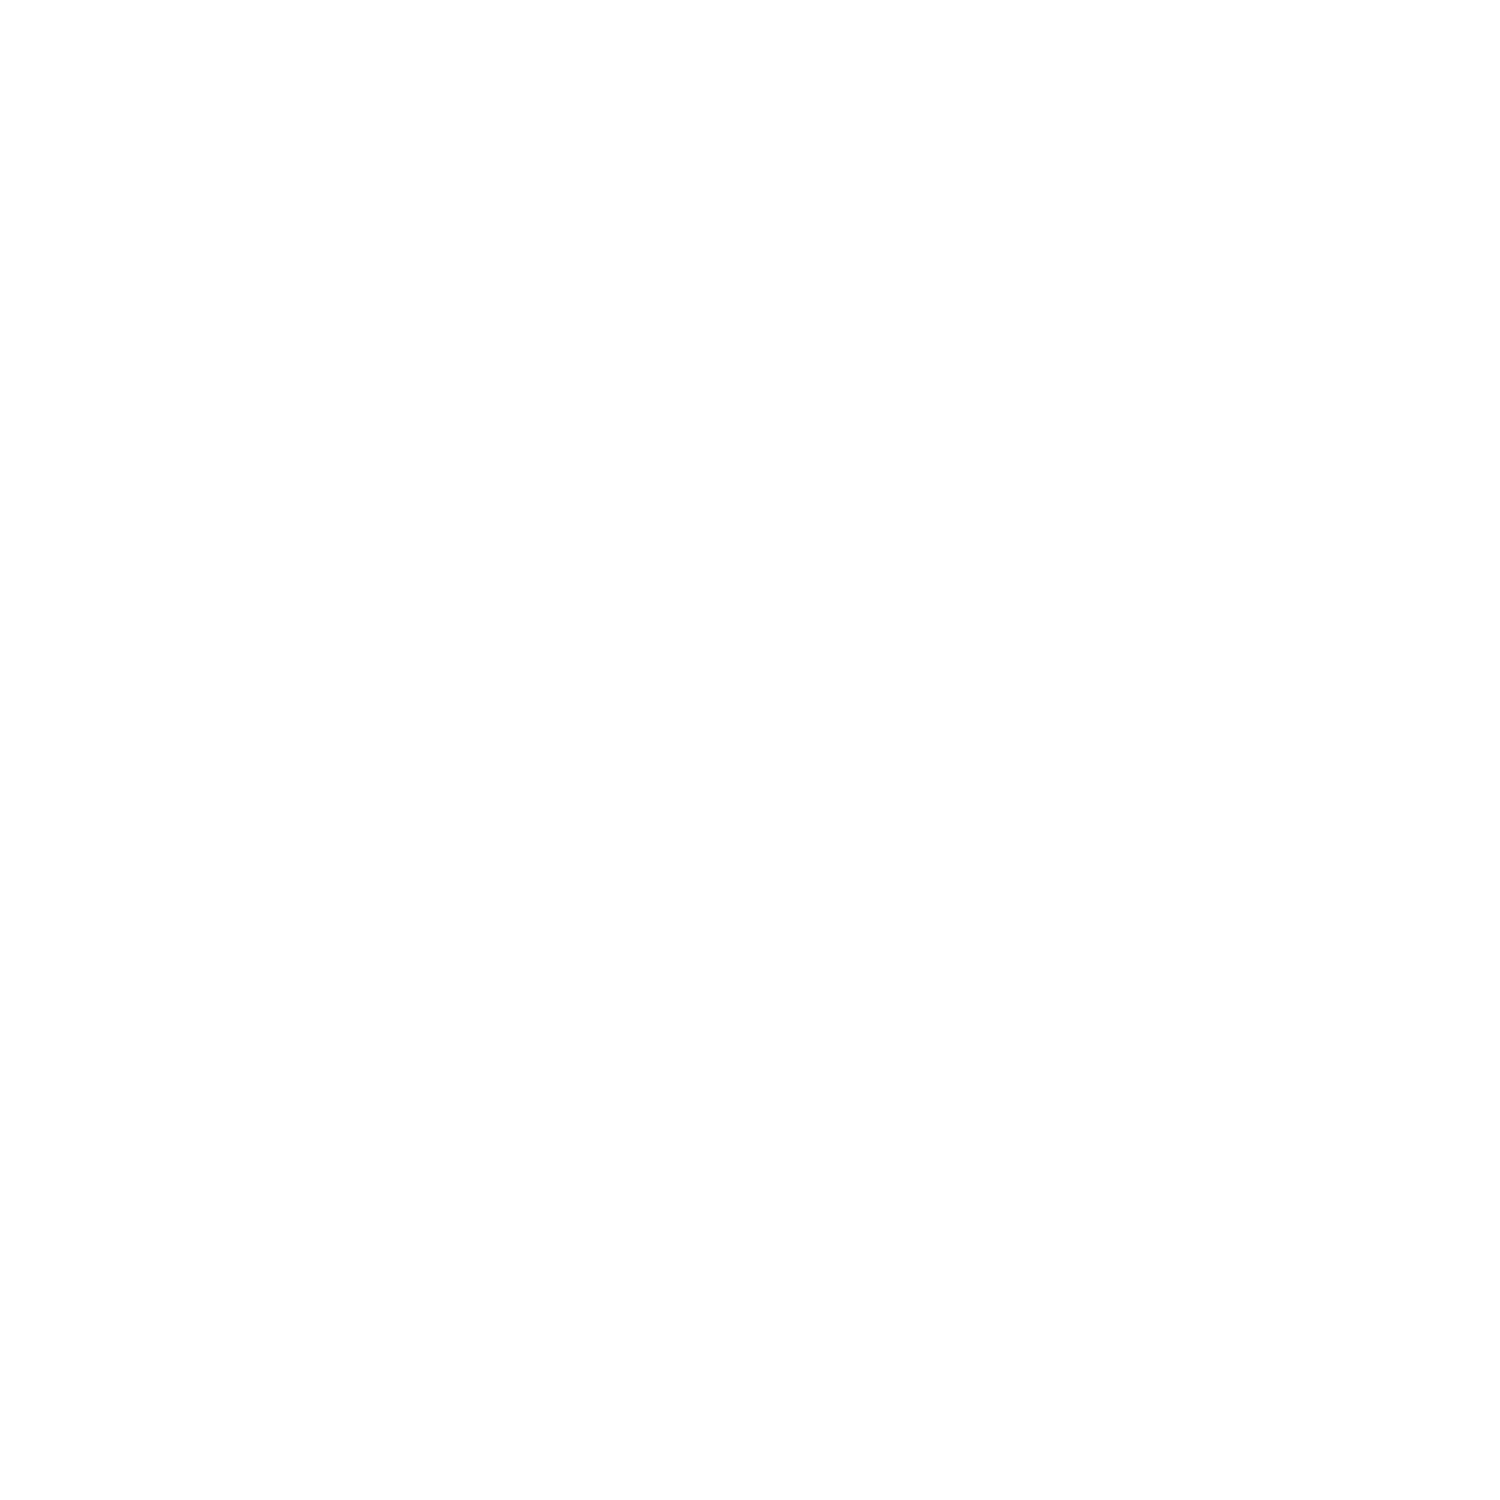 The Local Good Collective